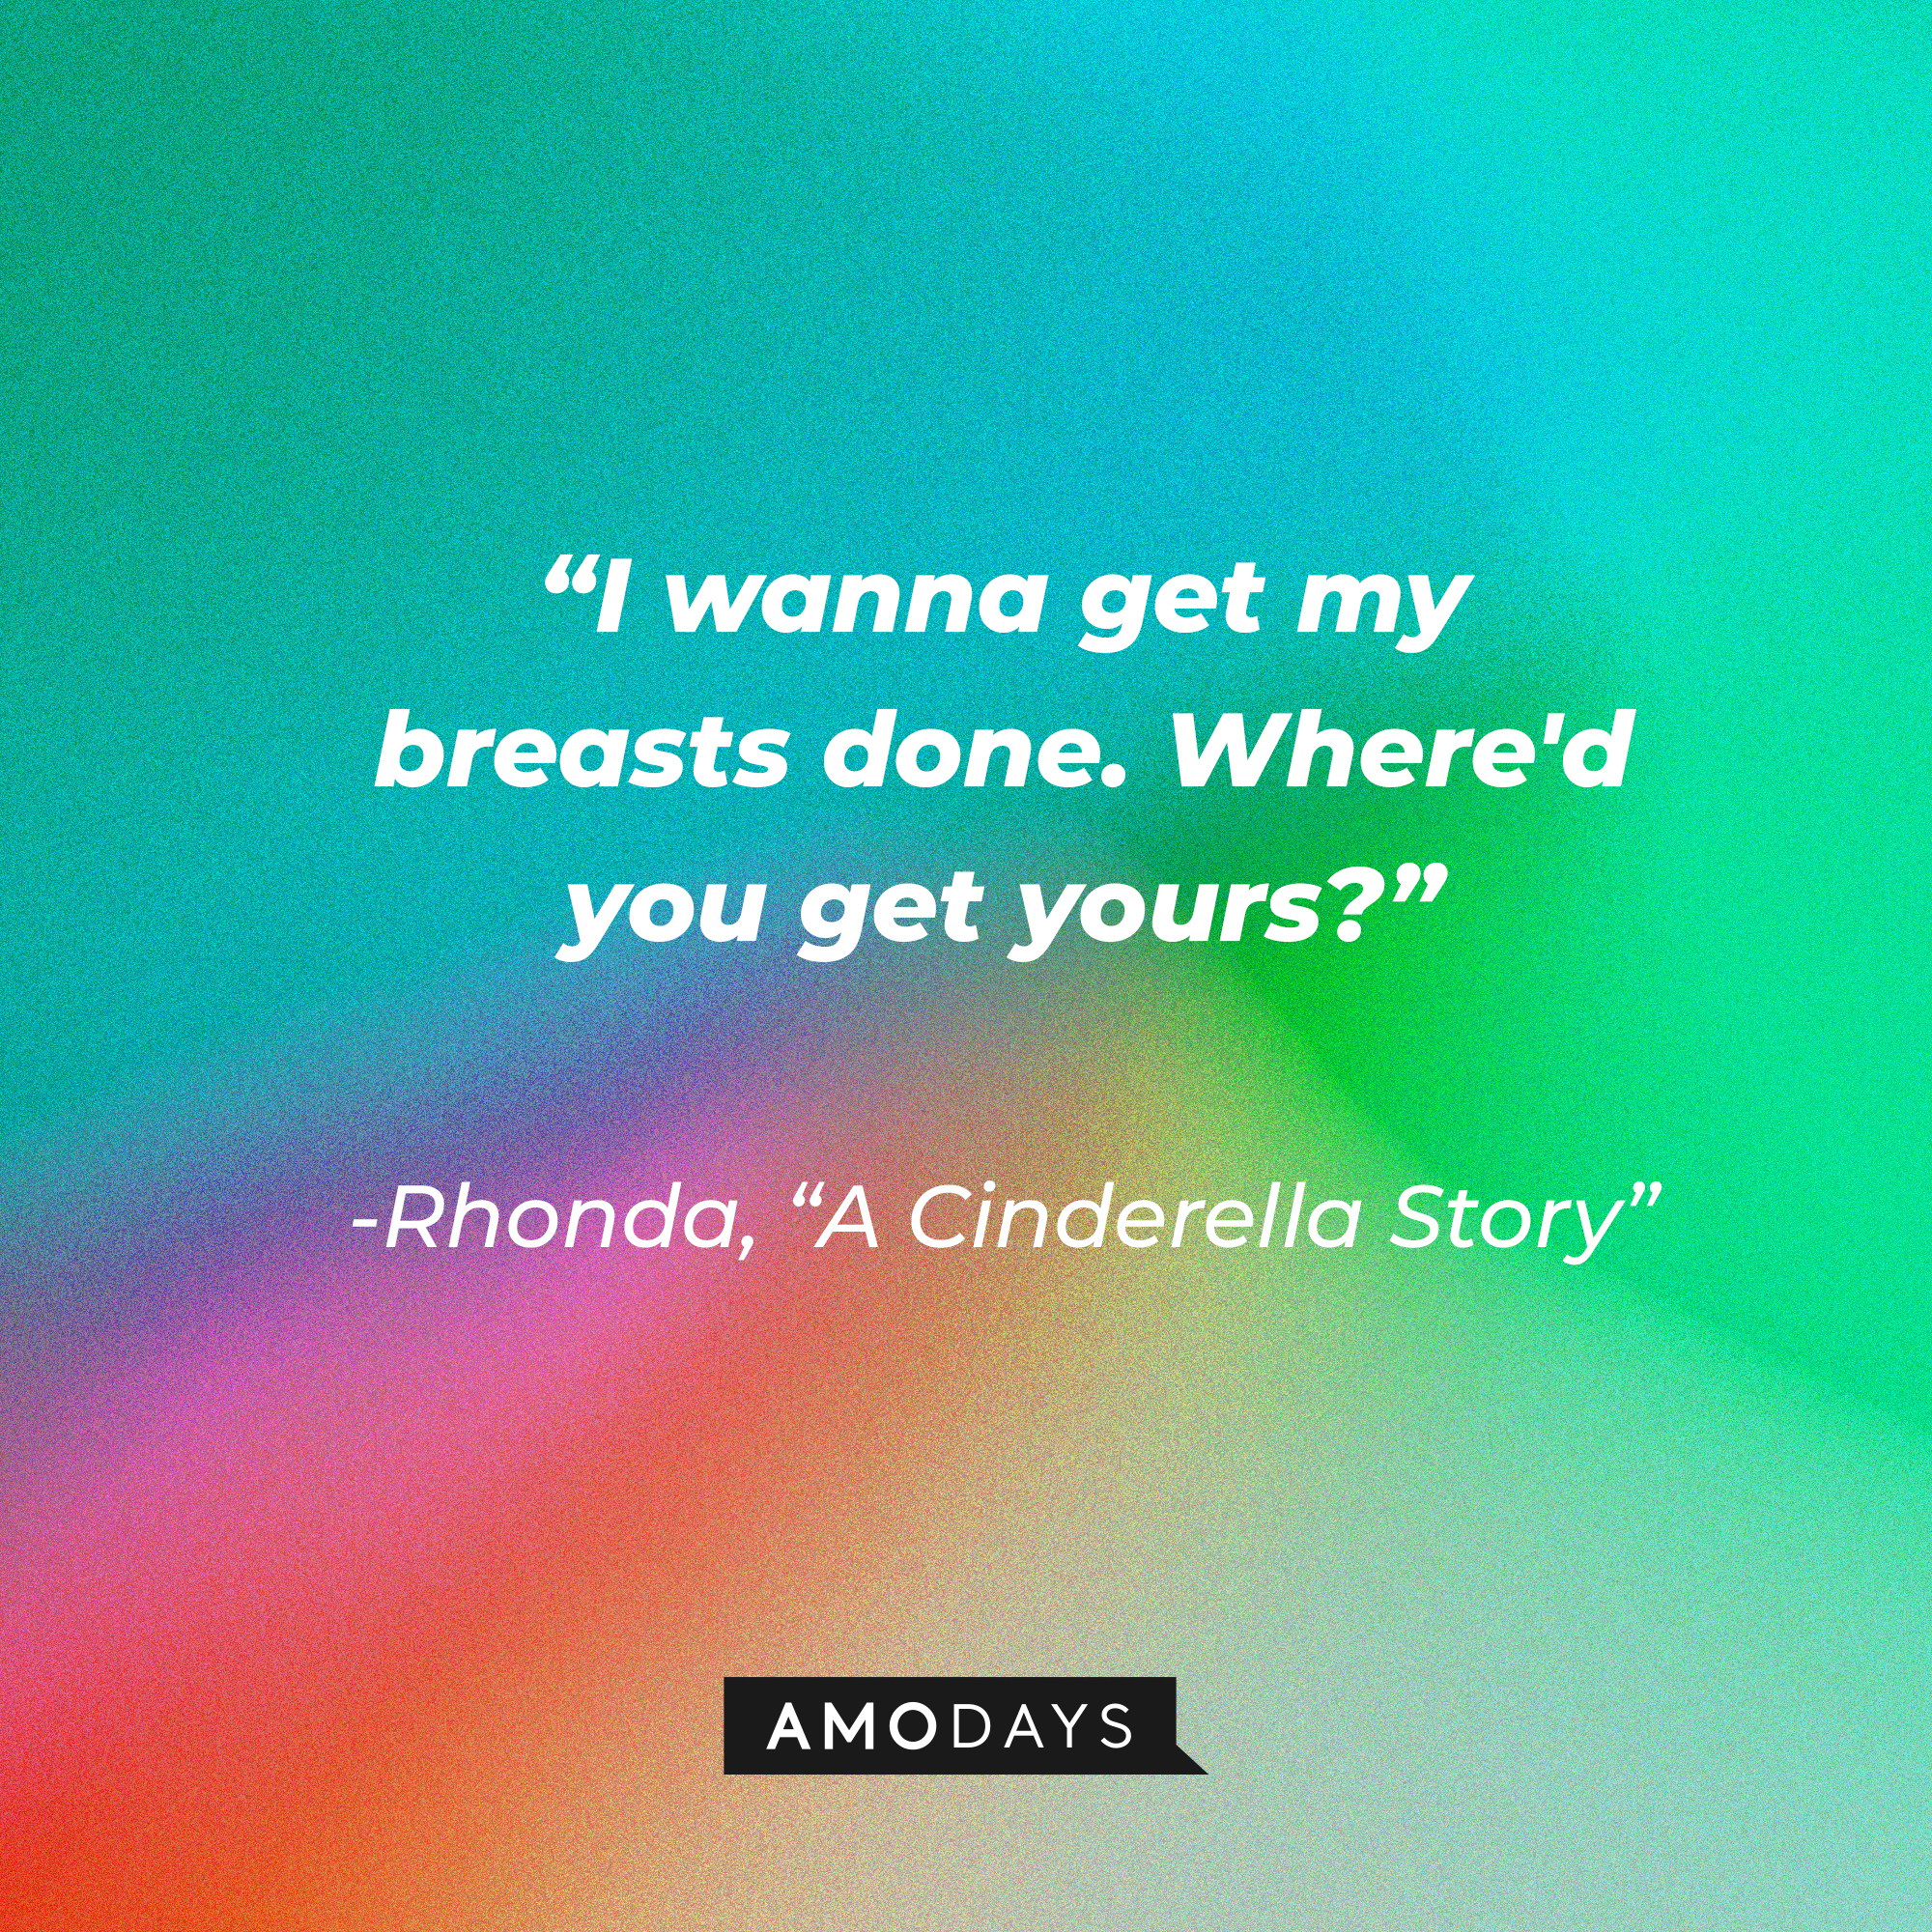 Rhonda's quote from "A Cinderella Story:" "I wanna get my breasts done. Where'd you get yours?" | Source: Youtube.com/warnerbrosentertainment